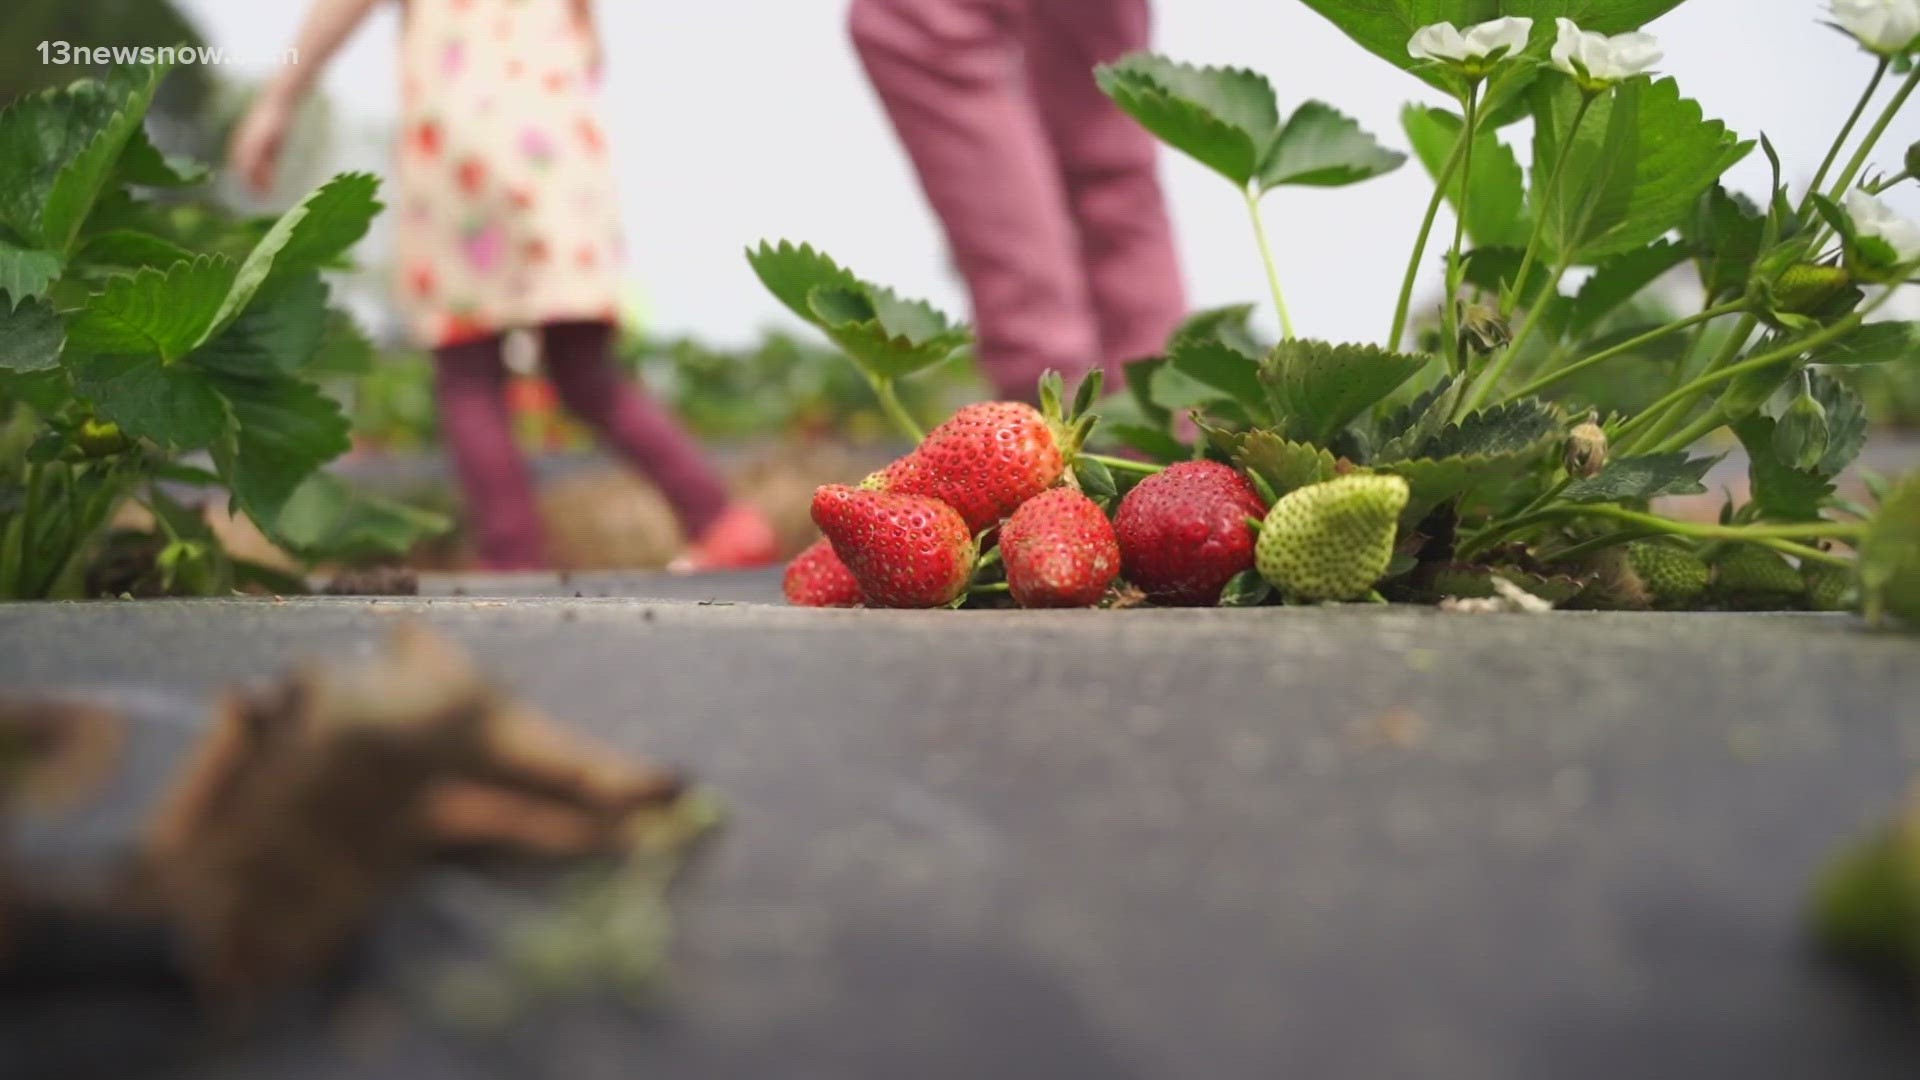 Local farms and produce stands across Hampton Roads are starting to offer their brightest, juiciest strawberries.